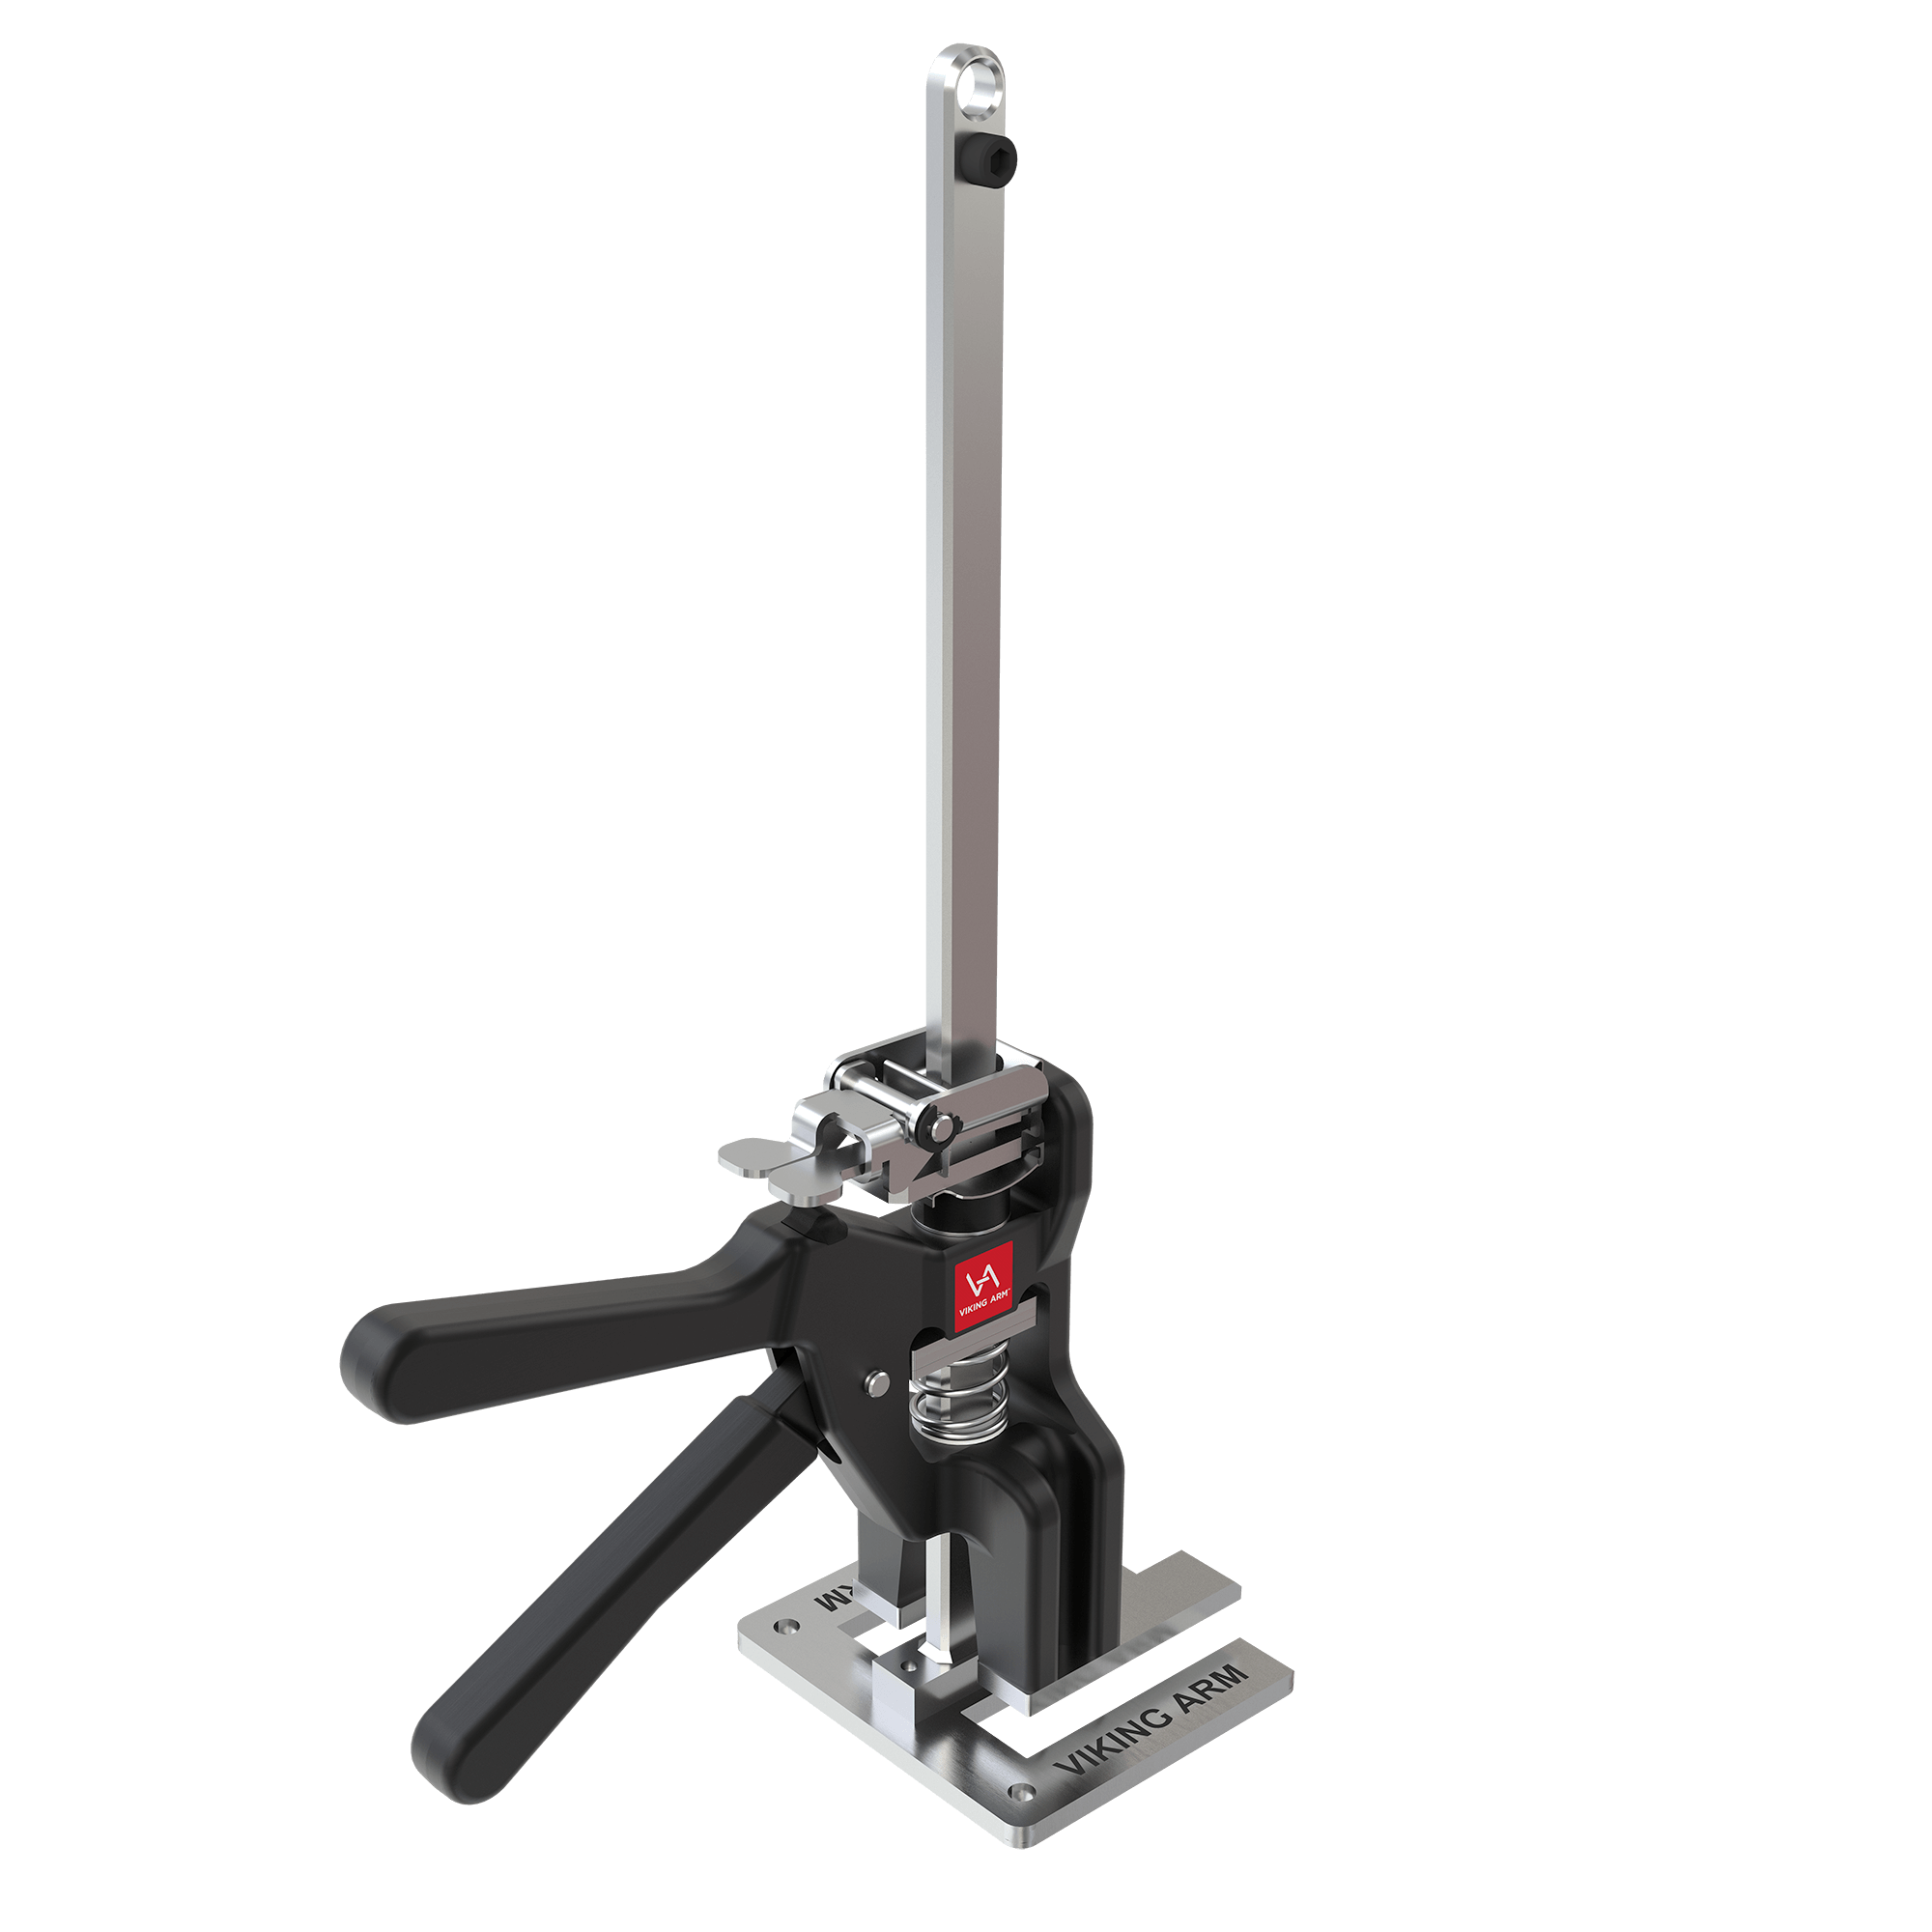 Viking Arm, The New Generation of Professional Grade Tools